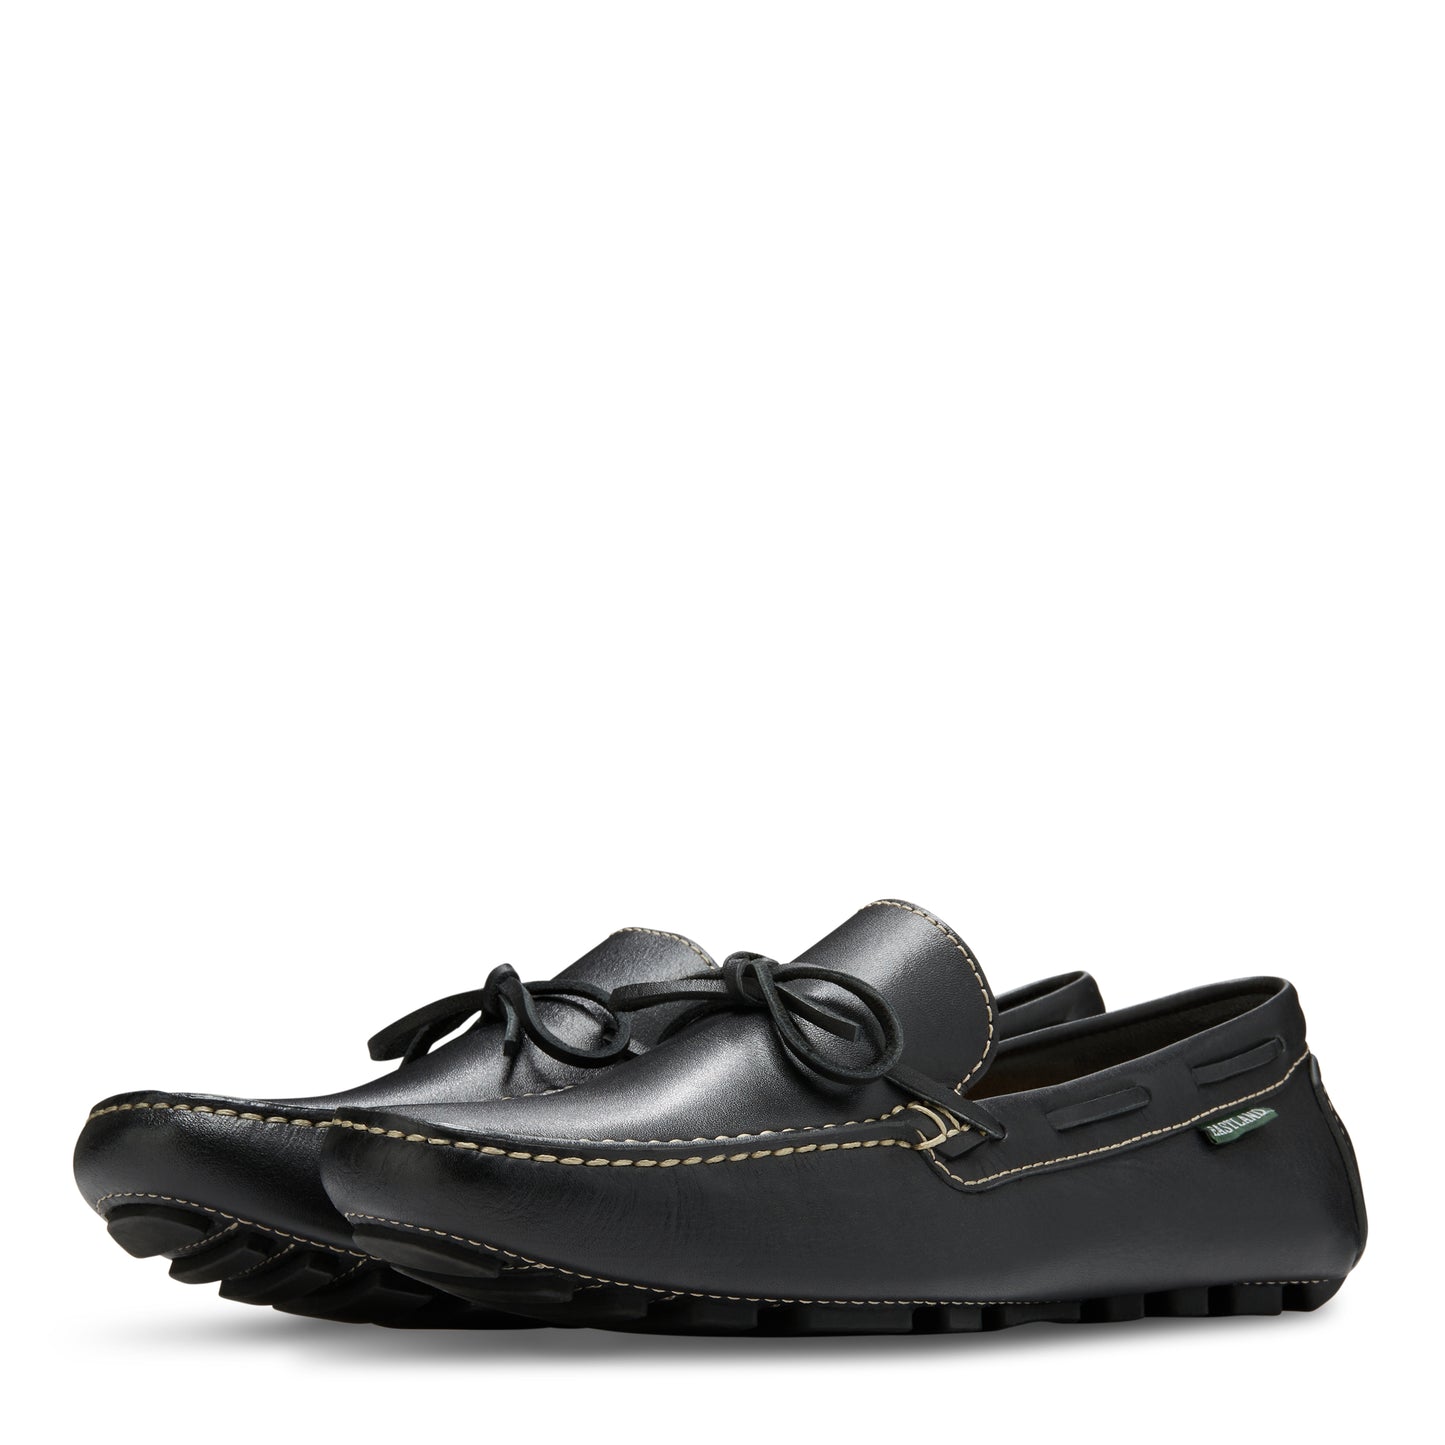 Men's Dustin Laced Collar Driving Moc